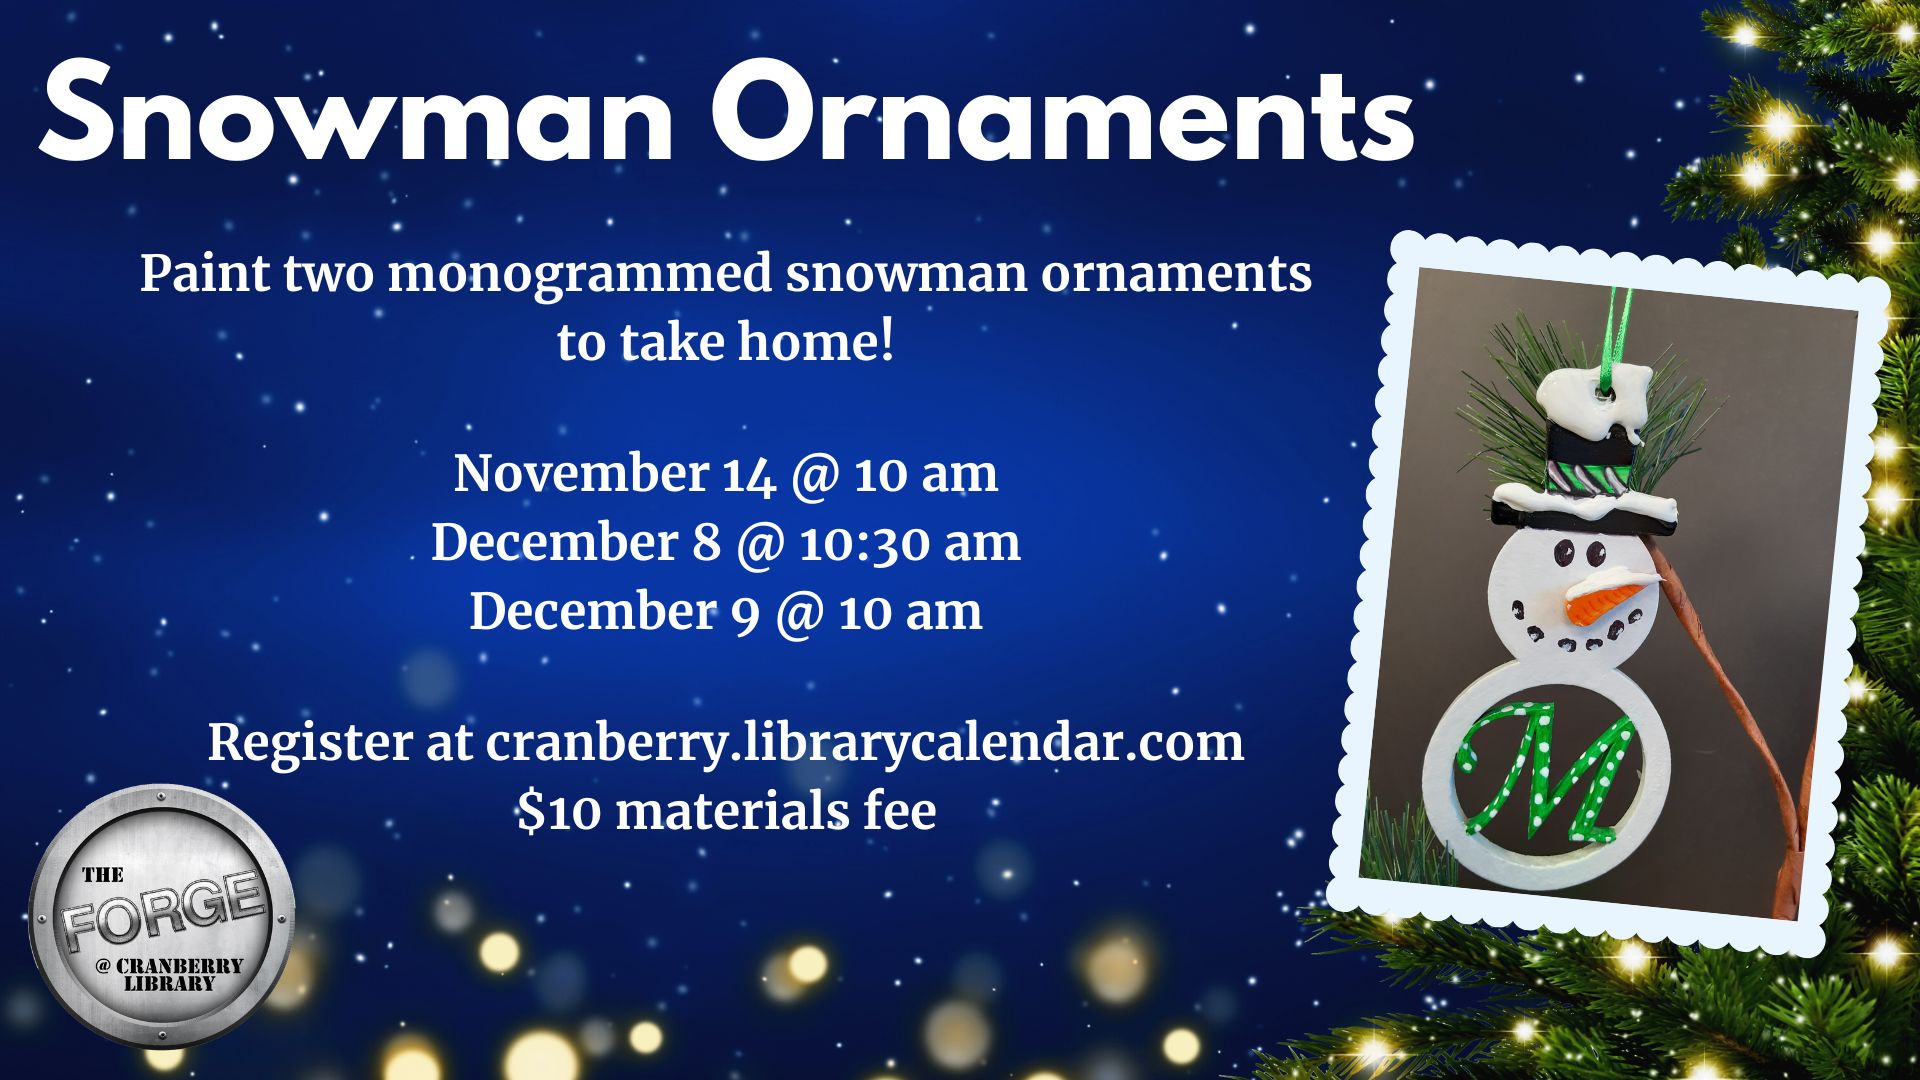 Flyer with a monogram snowman ornament